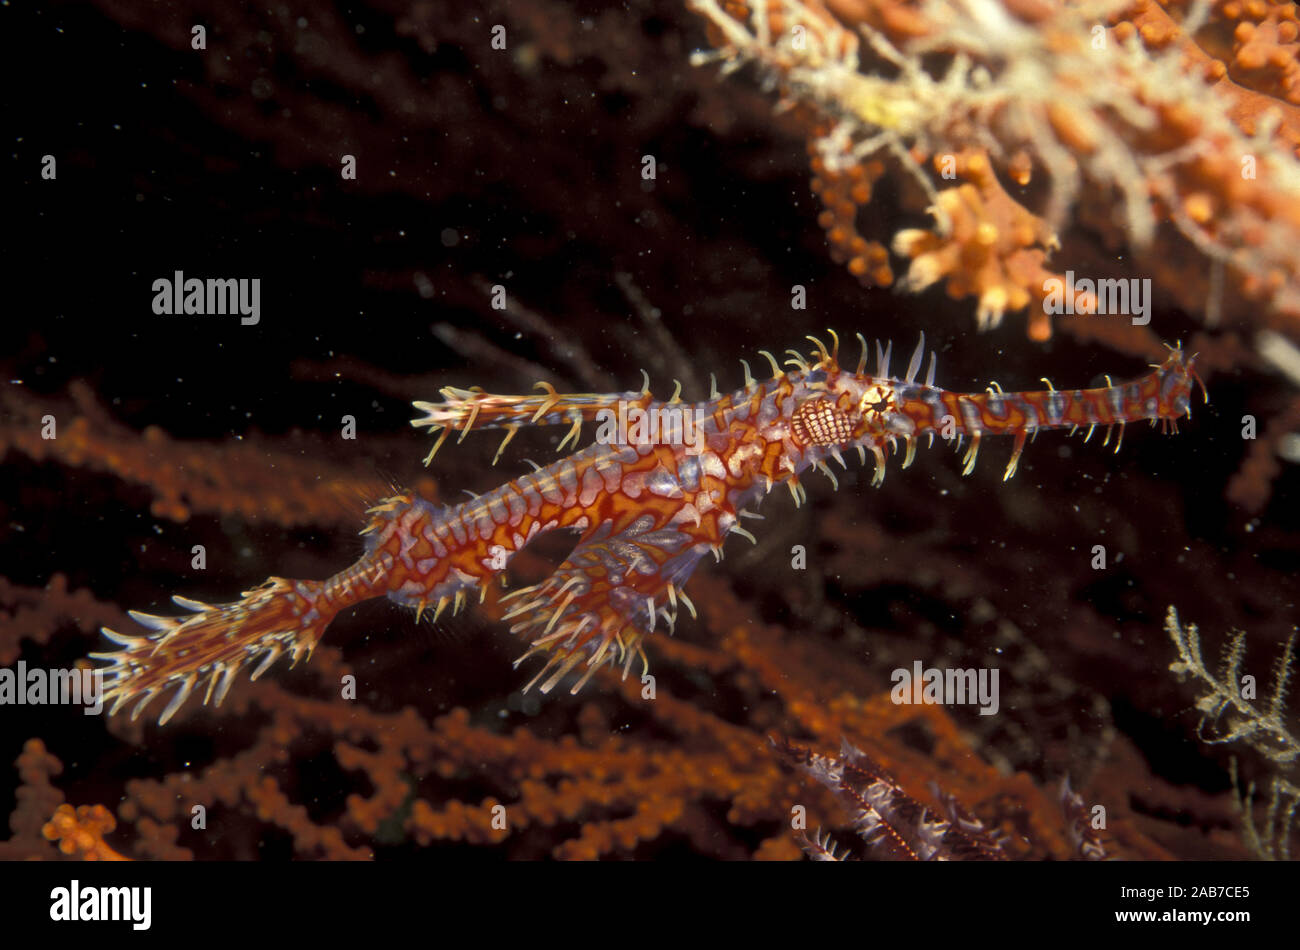 Ornate or Harlequin ghost pipefish (Solenostomus paradoxus), a species with excellent camouflage, living adjacent to Featherstars and soft corals. Pap Stock Photo